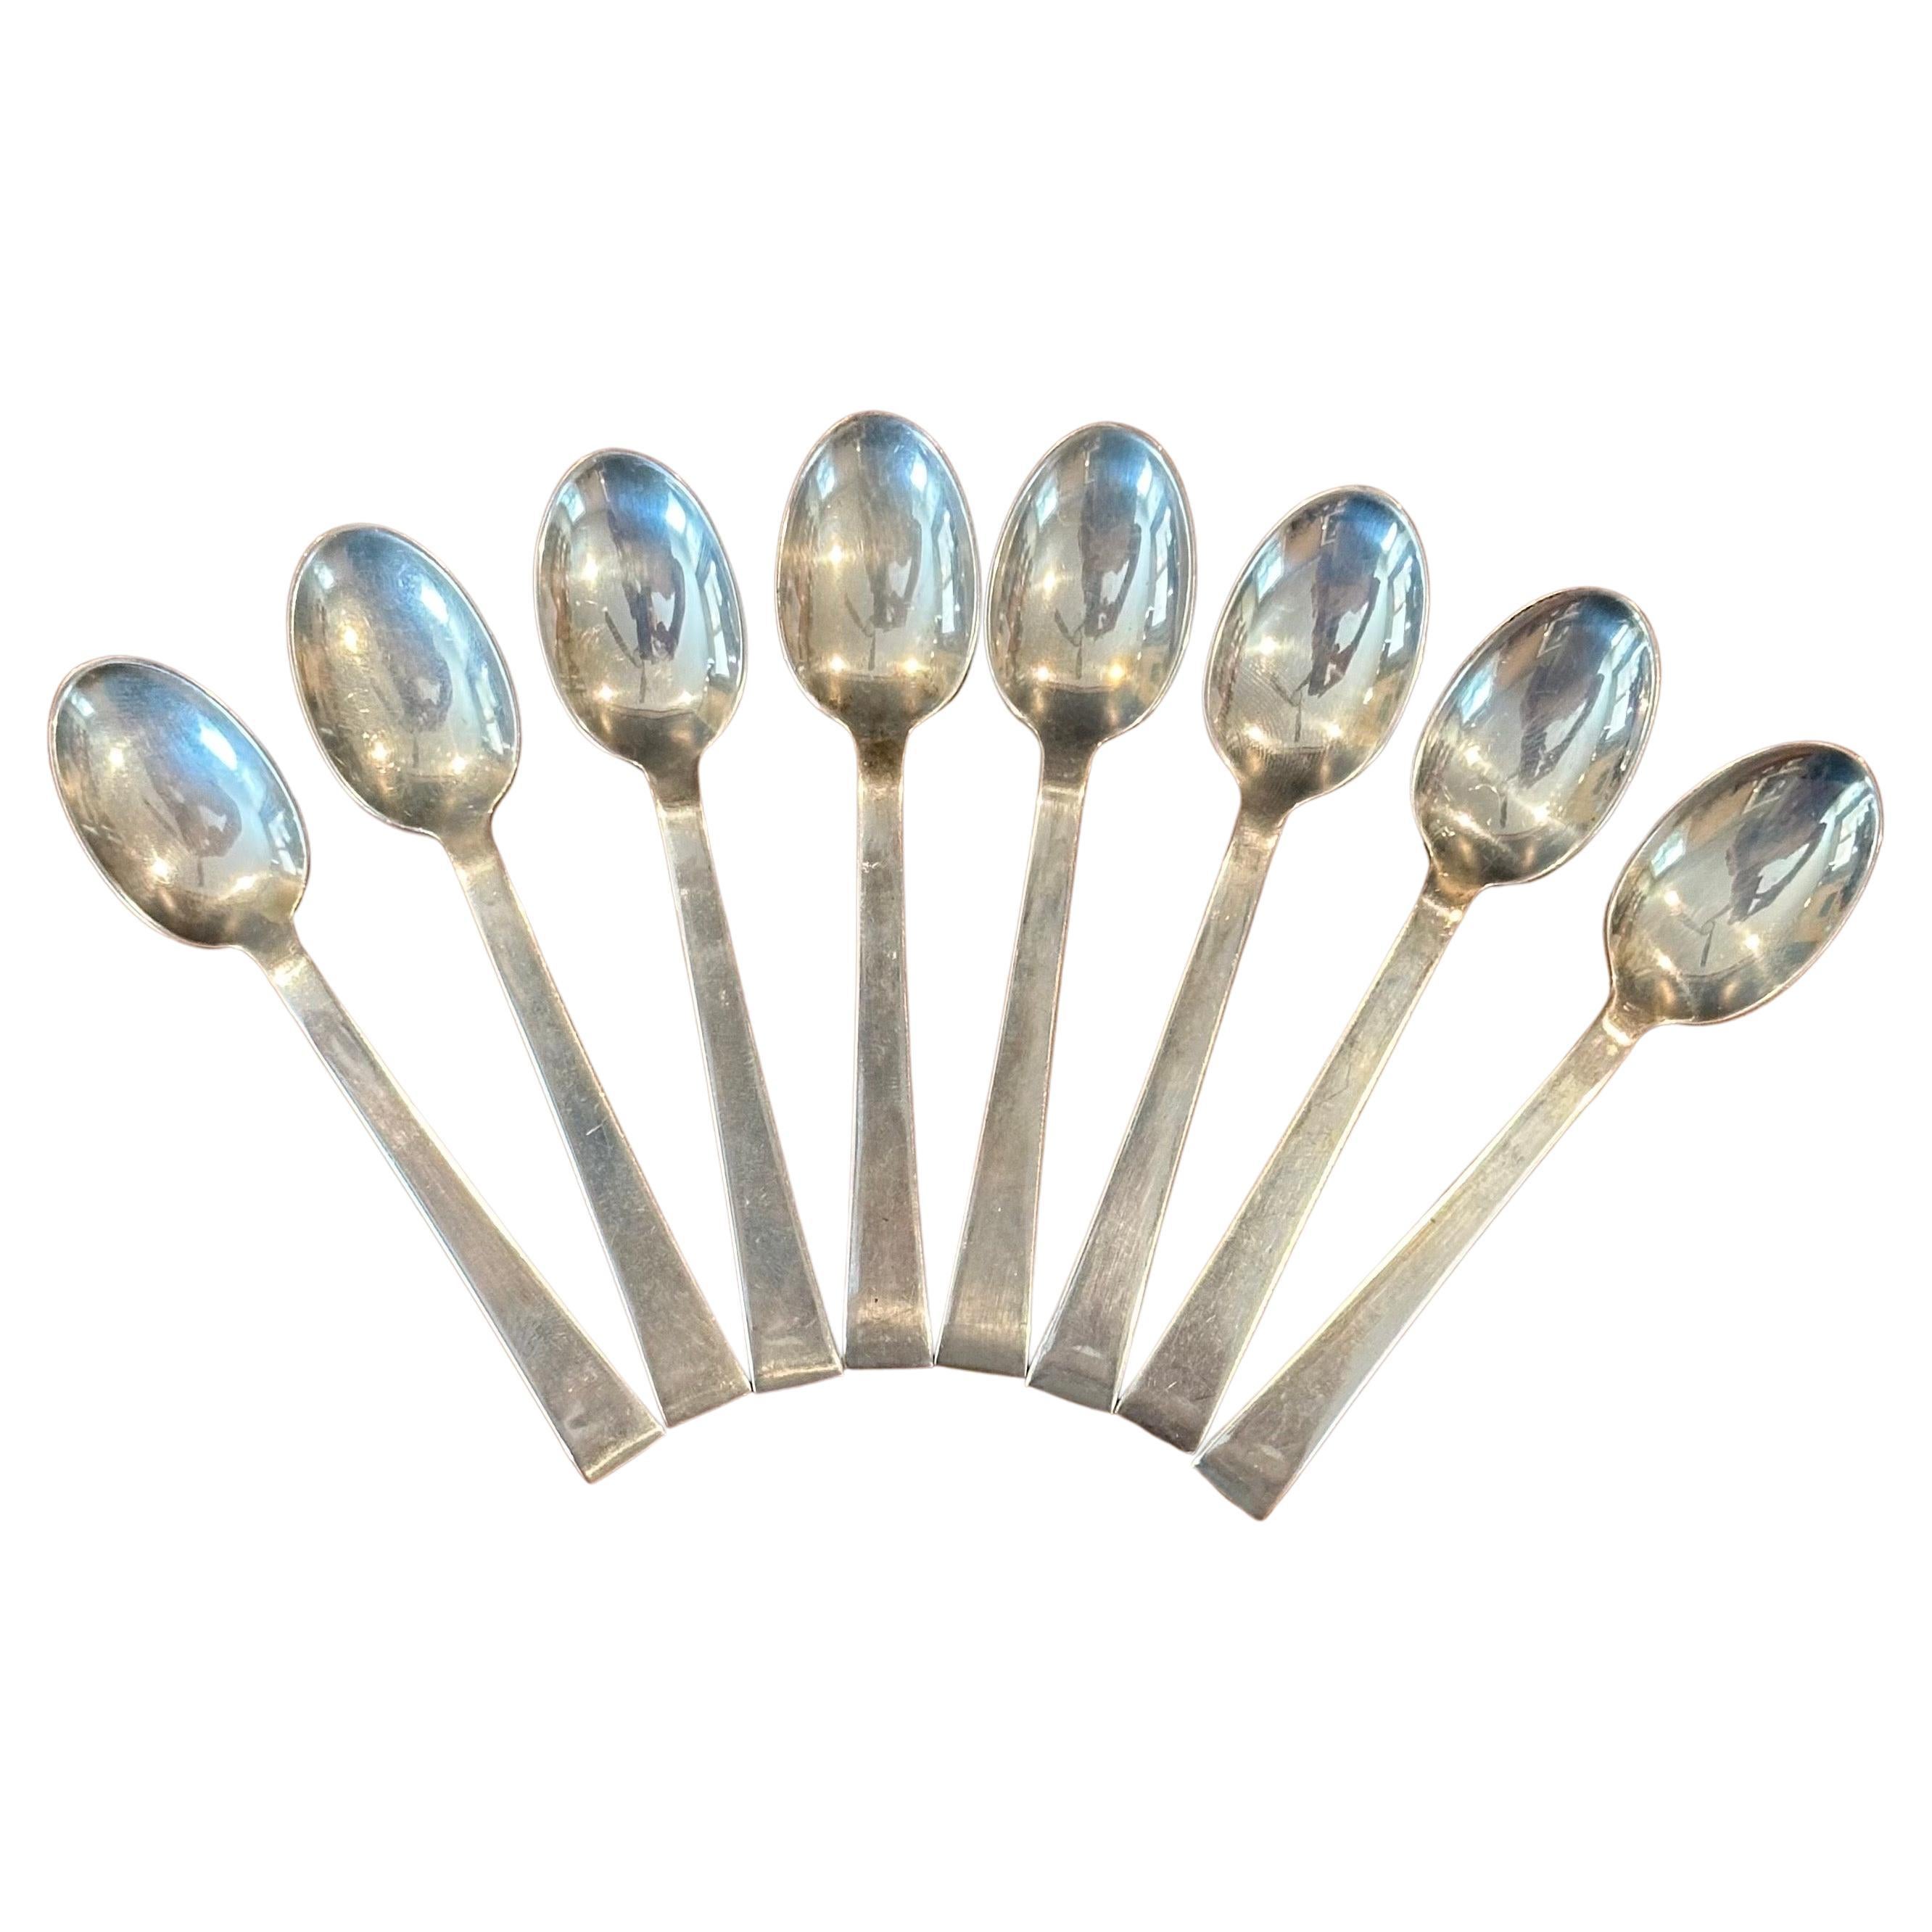 Simple and elegant stylized set of eight MCM demitasse spoons in sterling silver by International Silver, circa 1970s. The set is in very good vintage condition and each spoon measures .75